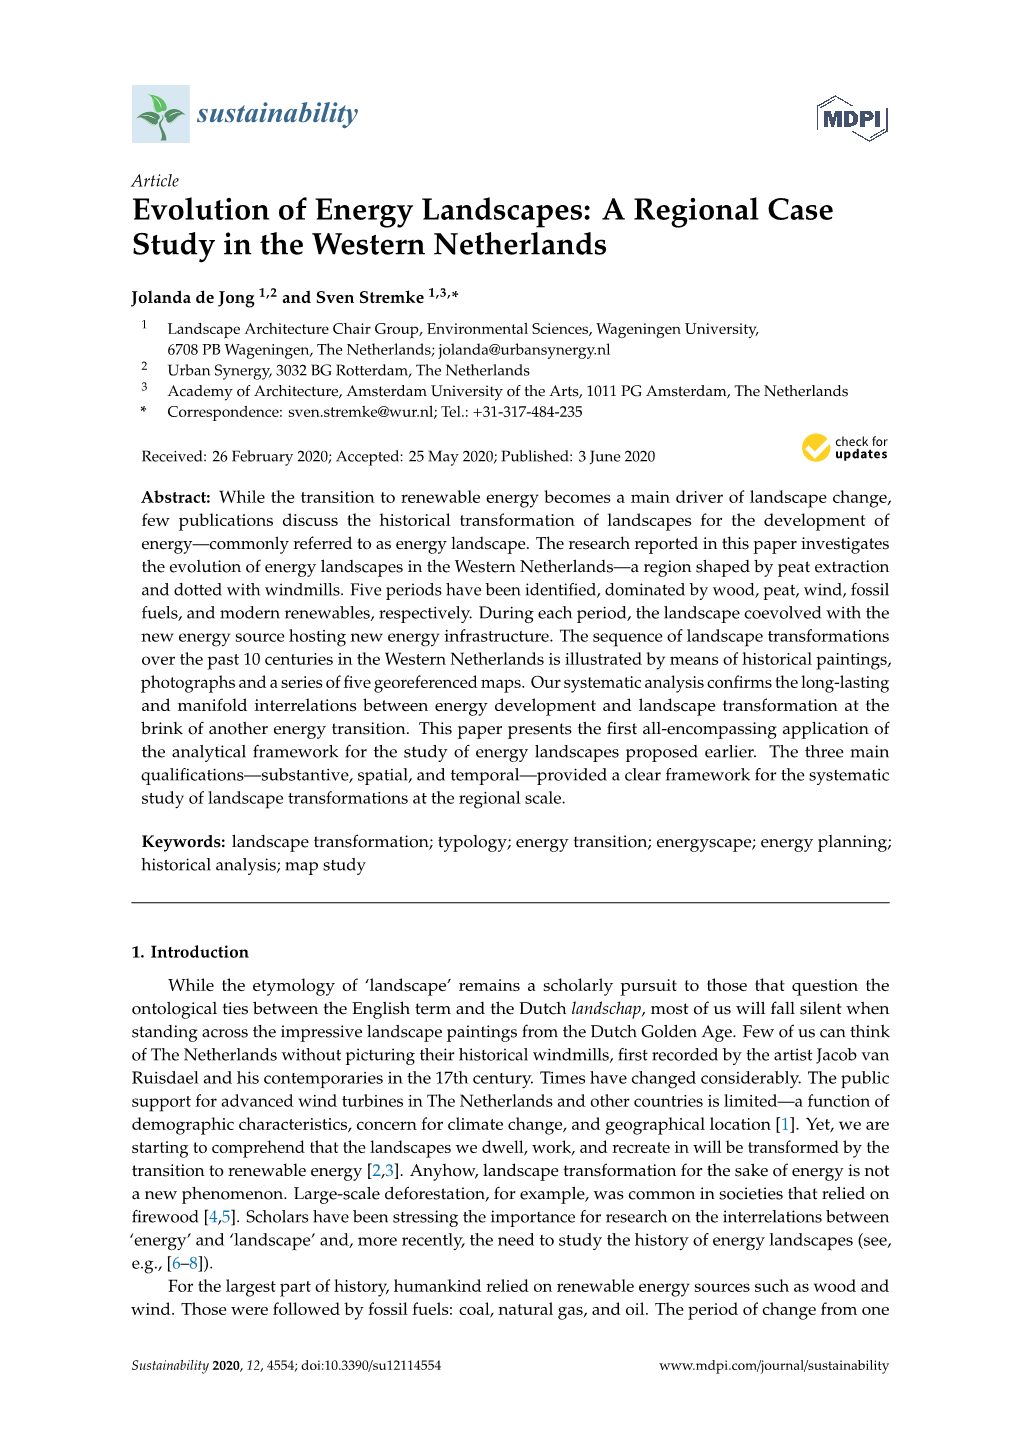 Evolution of Energy Landscapes: a Regional Case Study in the Western Netherlands